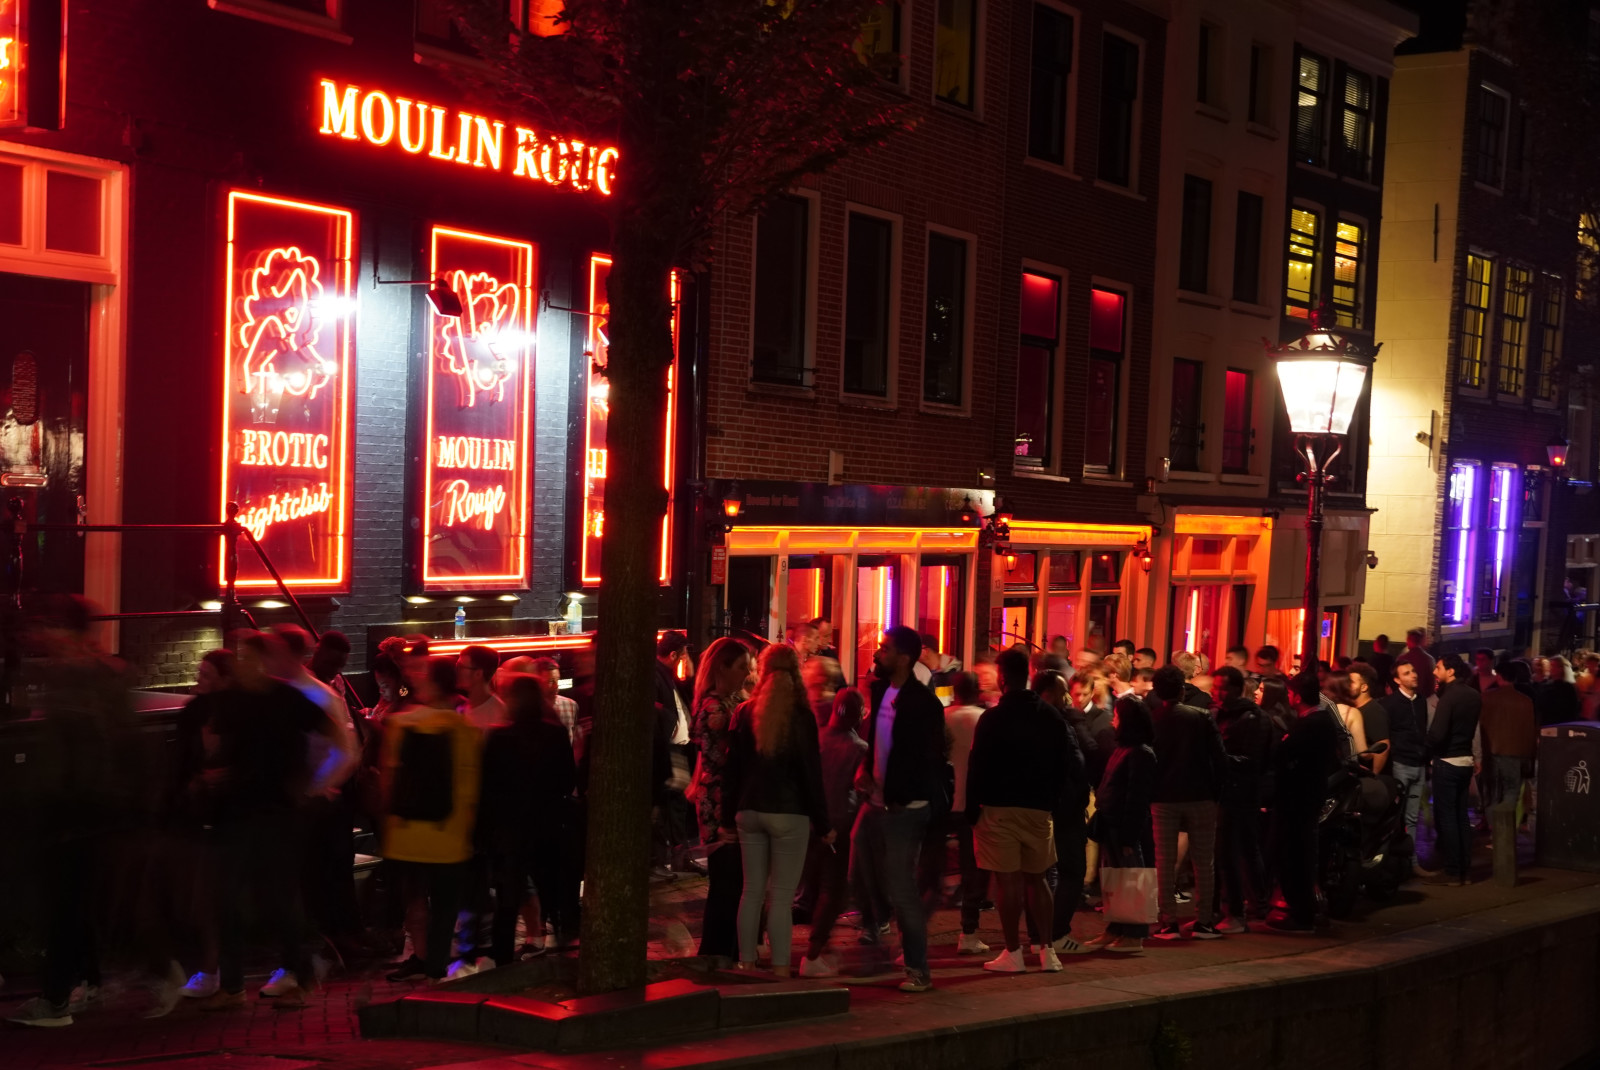 People standing on the streets next to building with red lights during nighttime